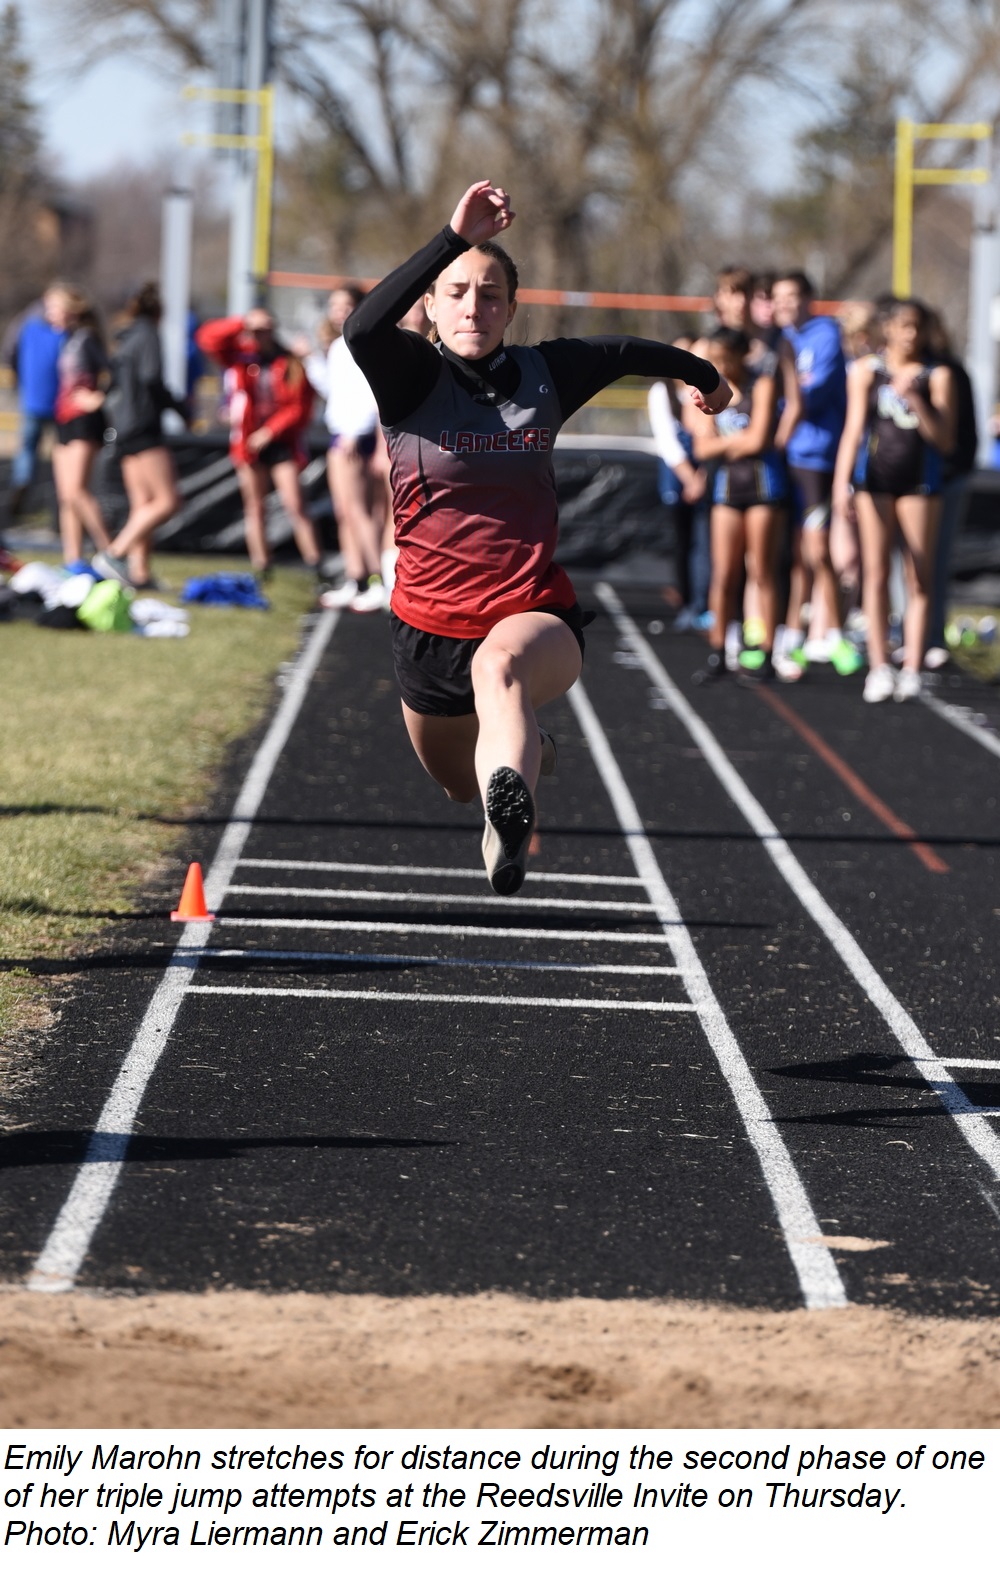 Emily Marohn stretches for distance during one of her triple jump attempts at the Reedsville Invite Thursday.